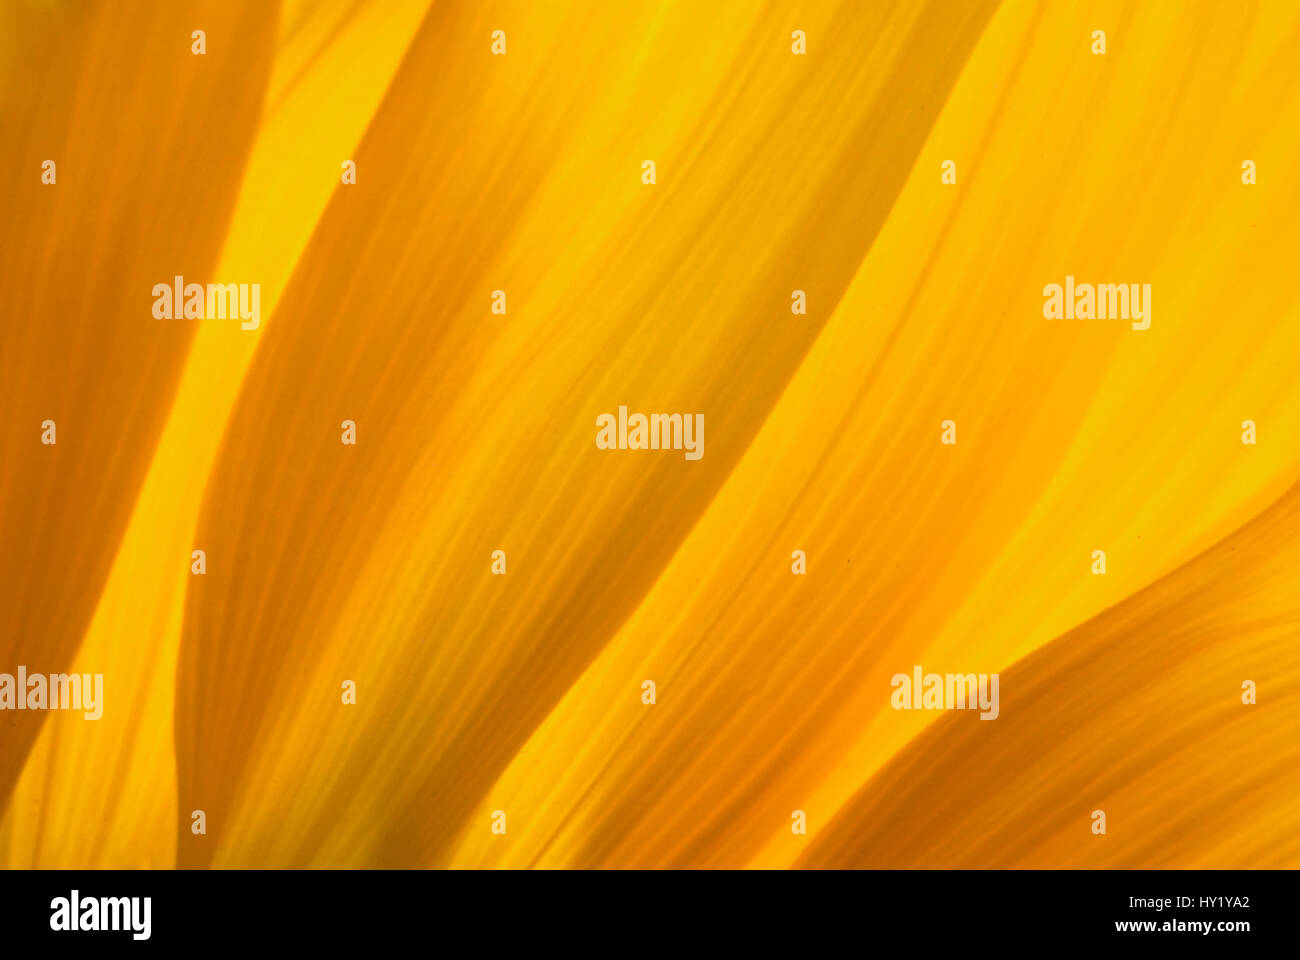 This marco stock photo shows a abstract detail of three sun flower petals with light shining through. The light is shining through revealing the struc Stock Photo